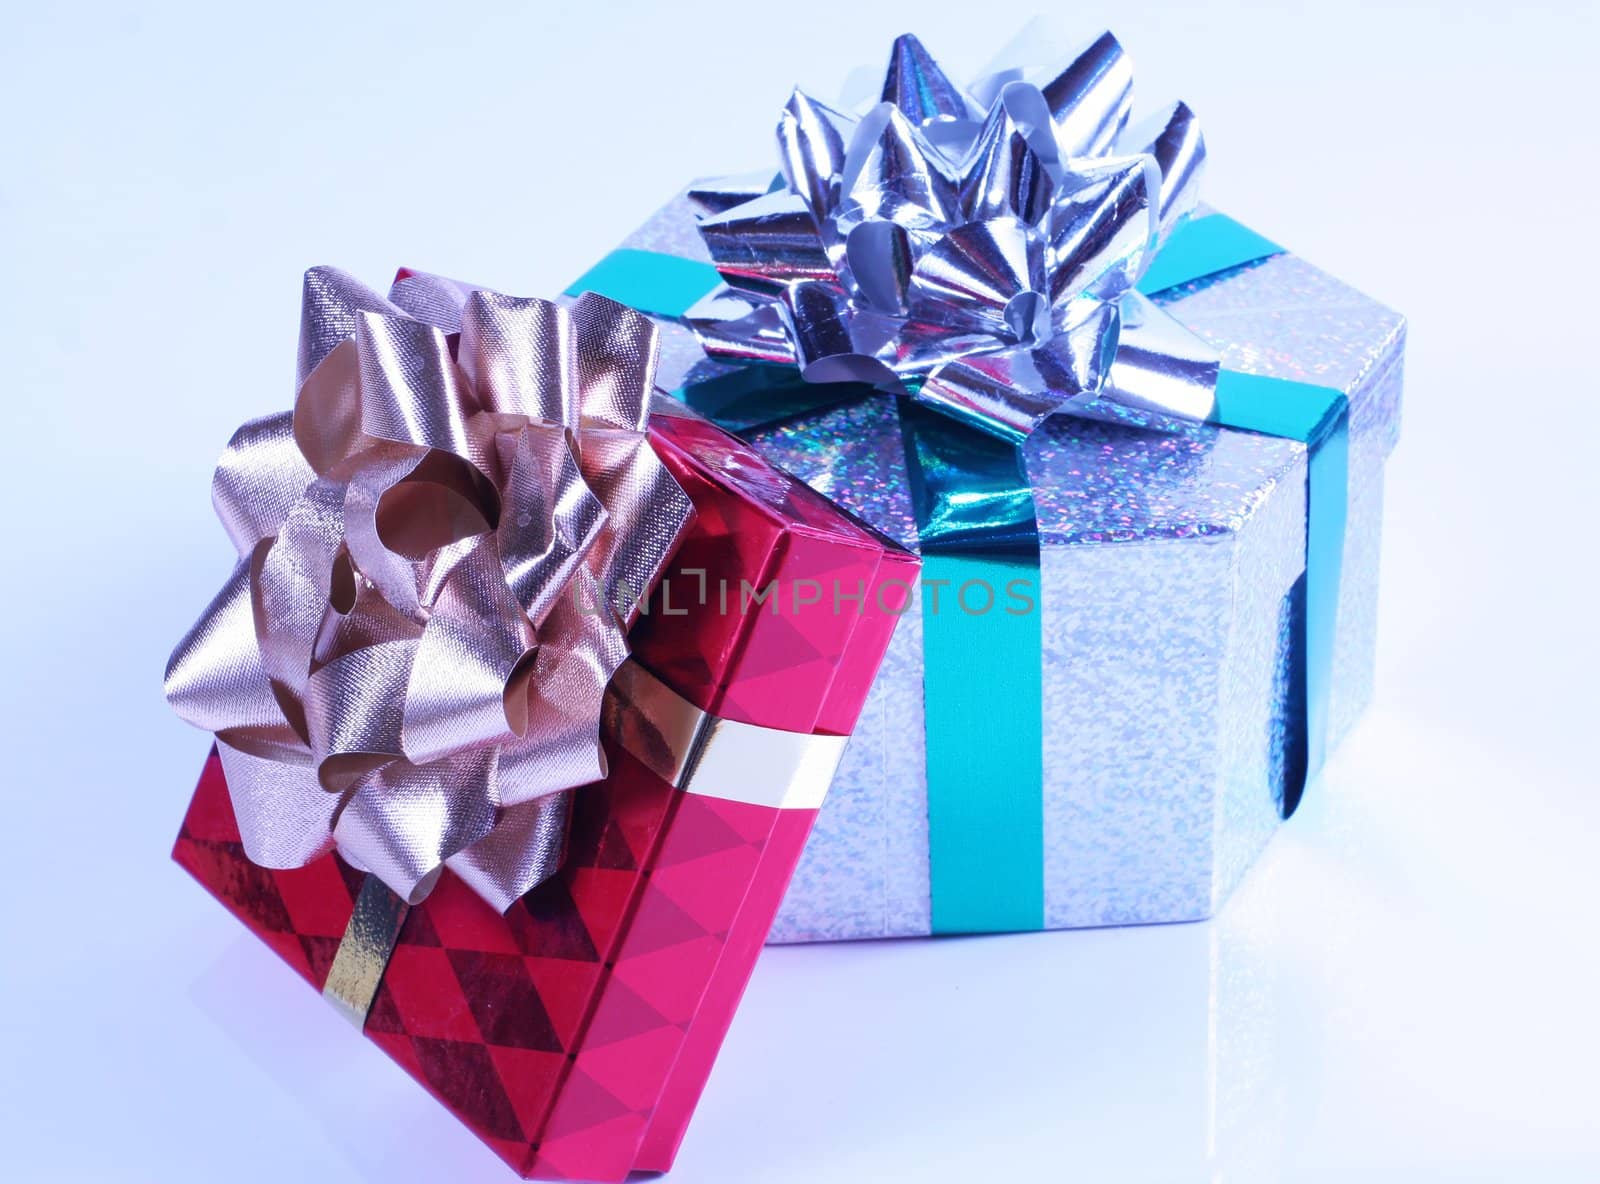 Shiny presents with ribbons and bows  by jarenwicklund